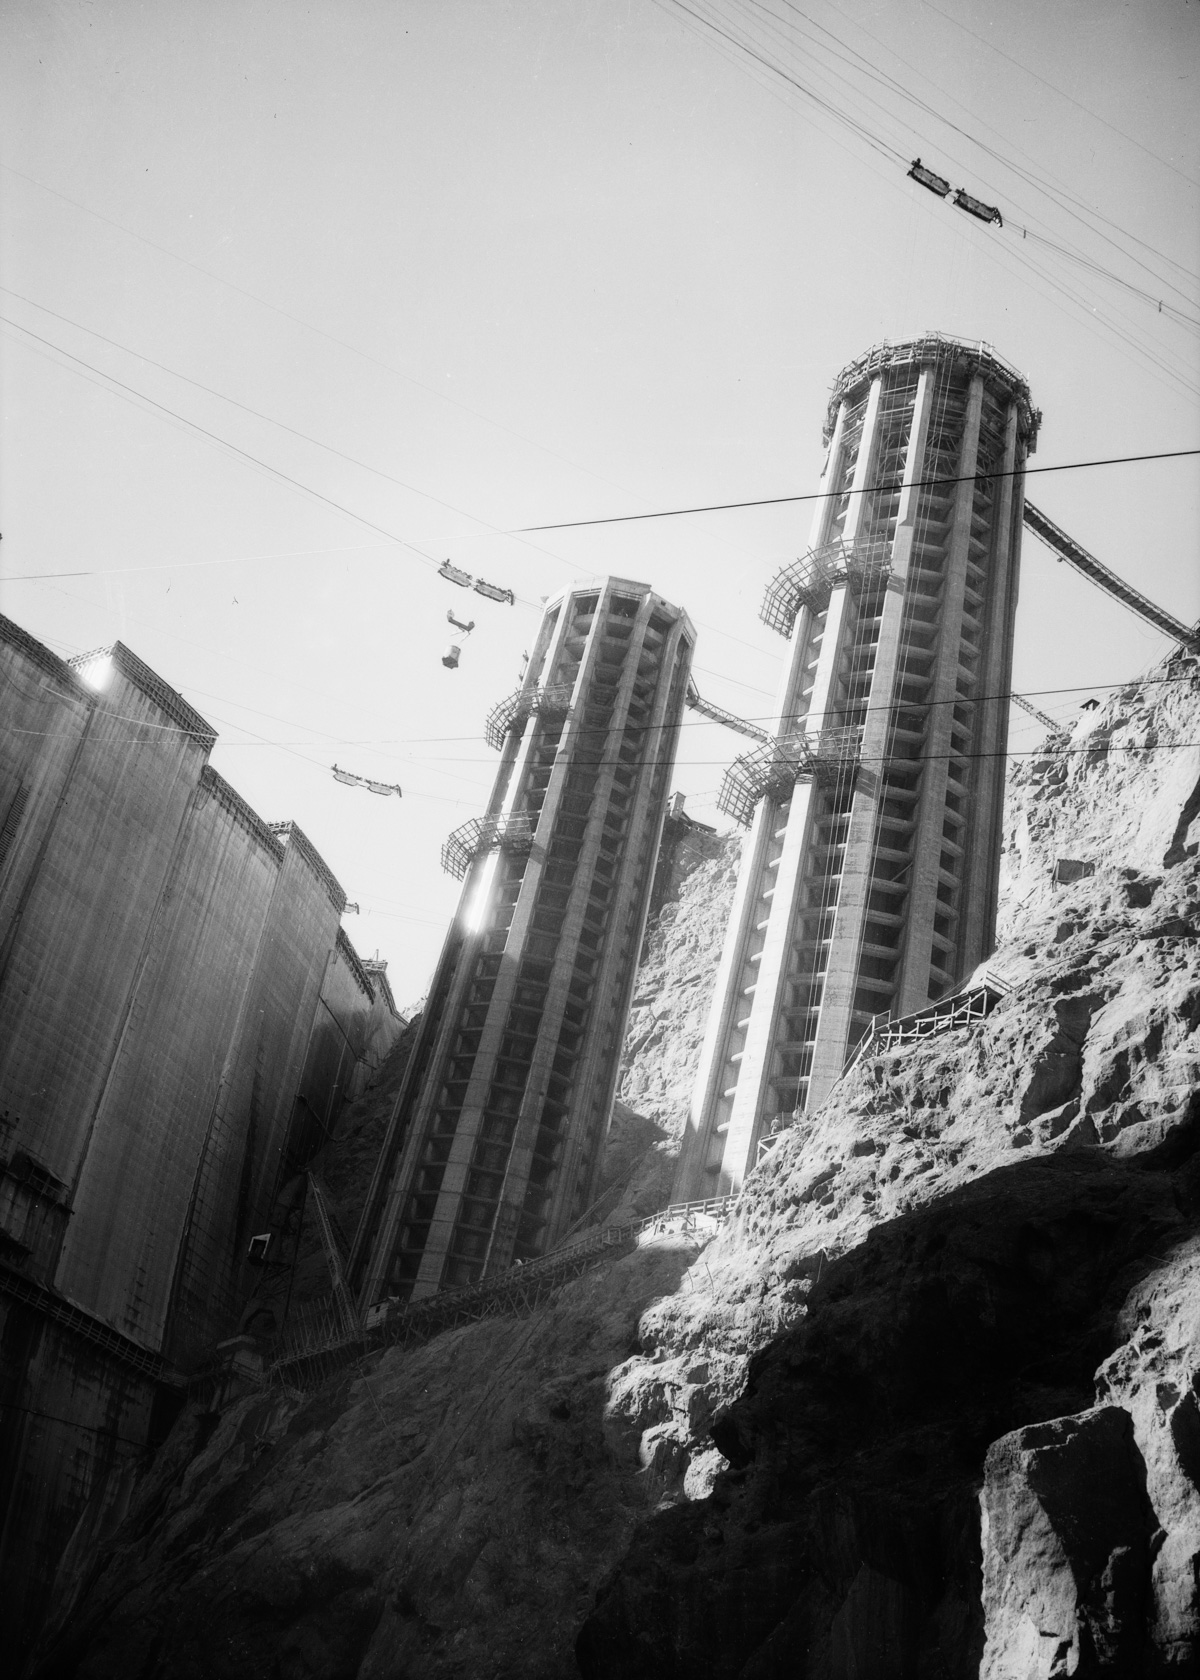 1934 --- Hoover dam vent towers during construction dw-1934-12-08-70~10 --- Image by © Dick Whittington Studio/Corbis